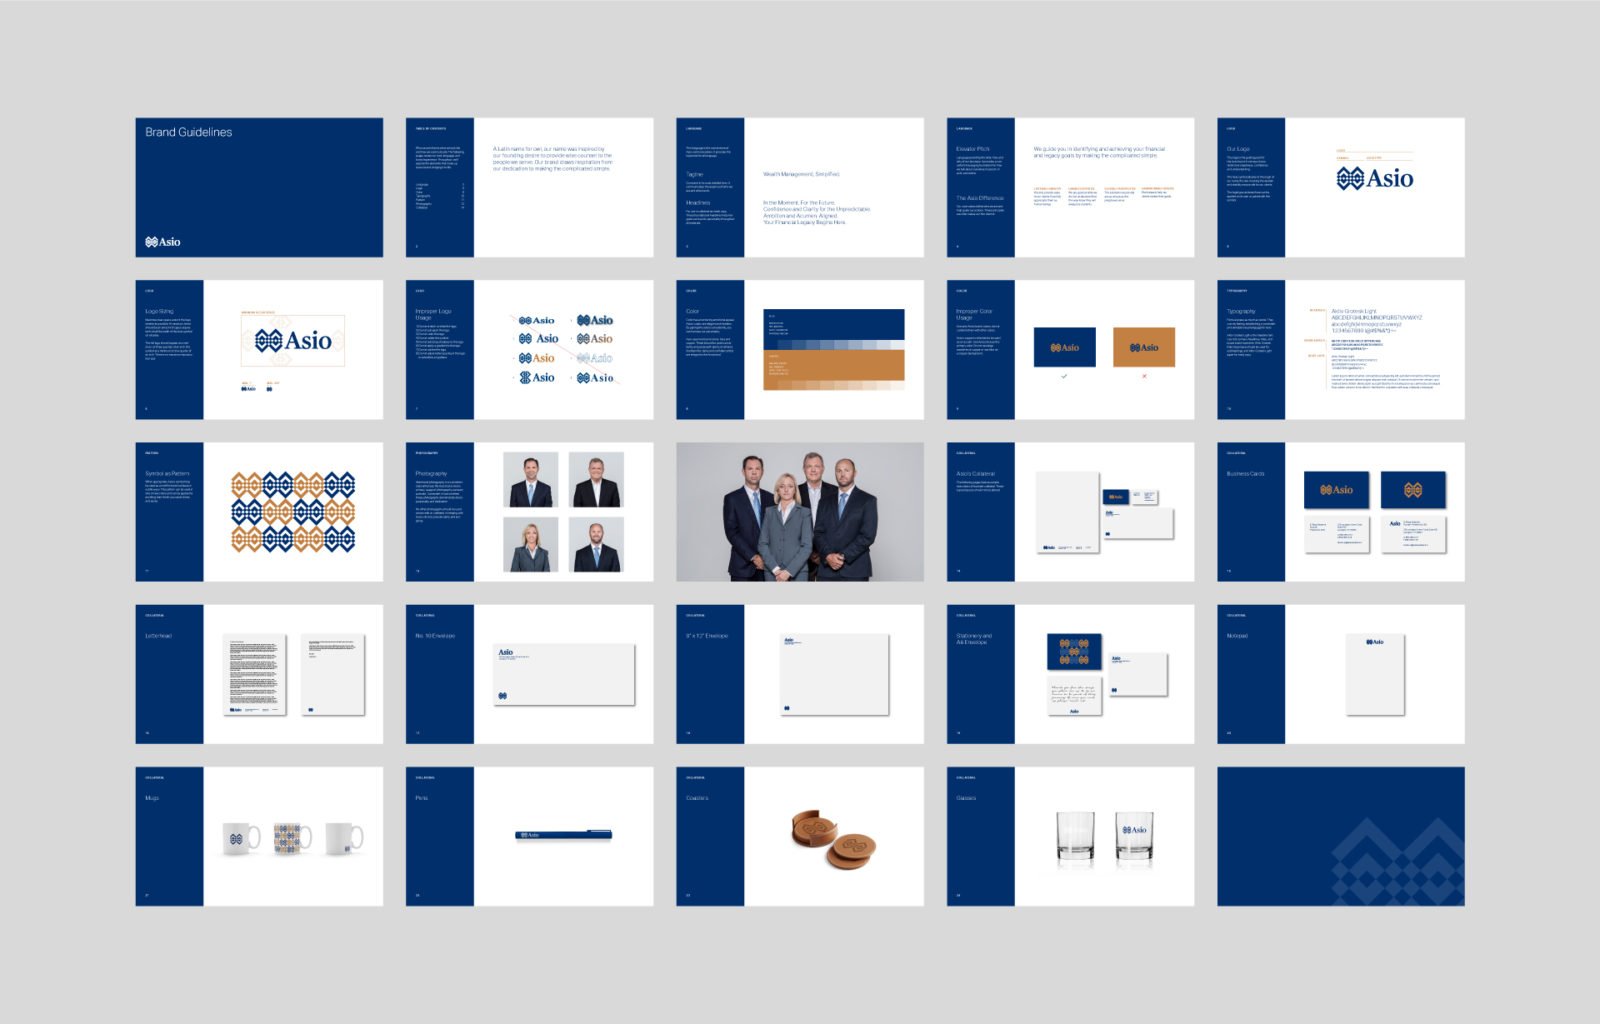 Asio Wealth Management Brand Guidelines